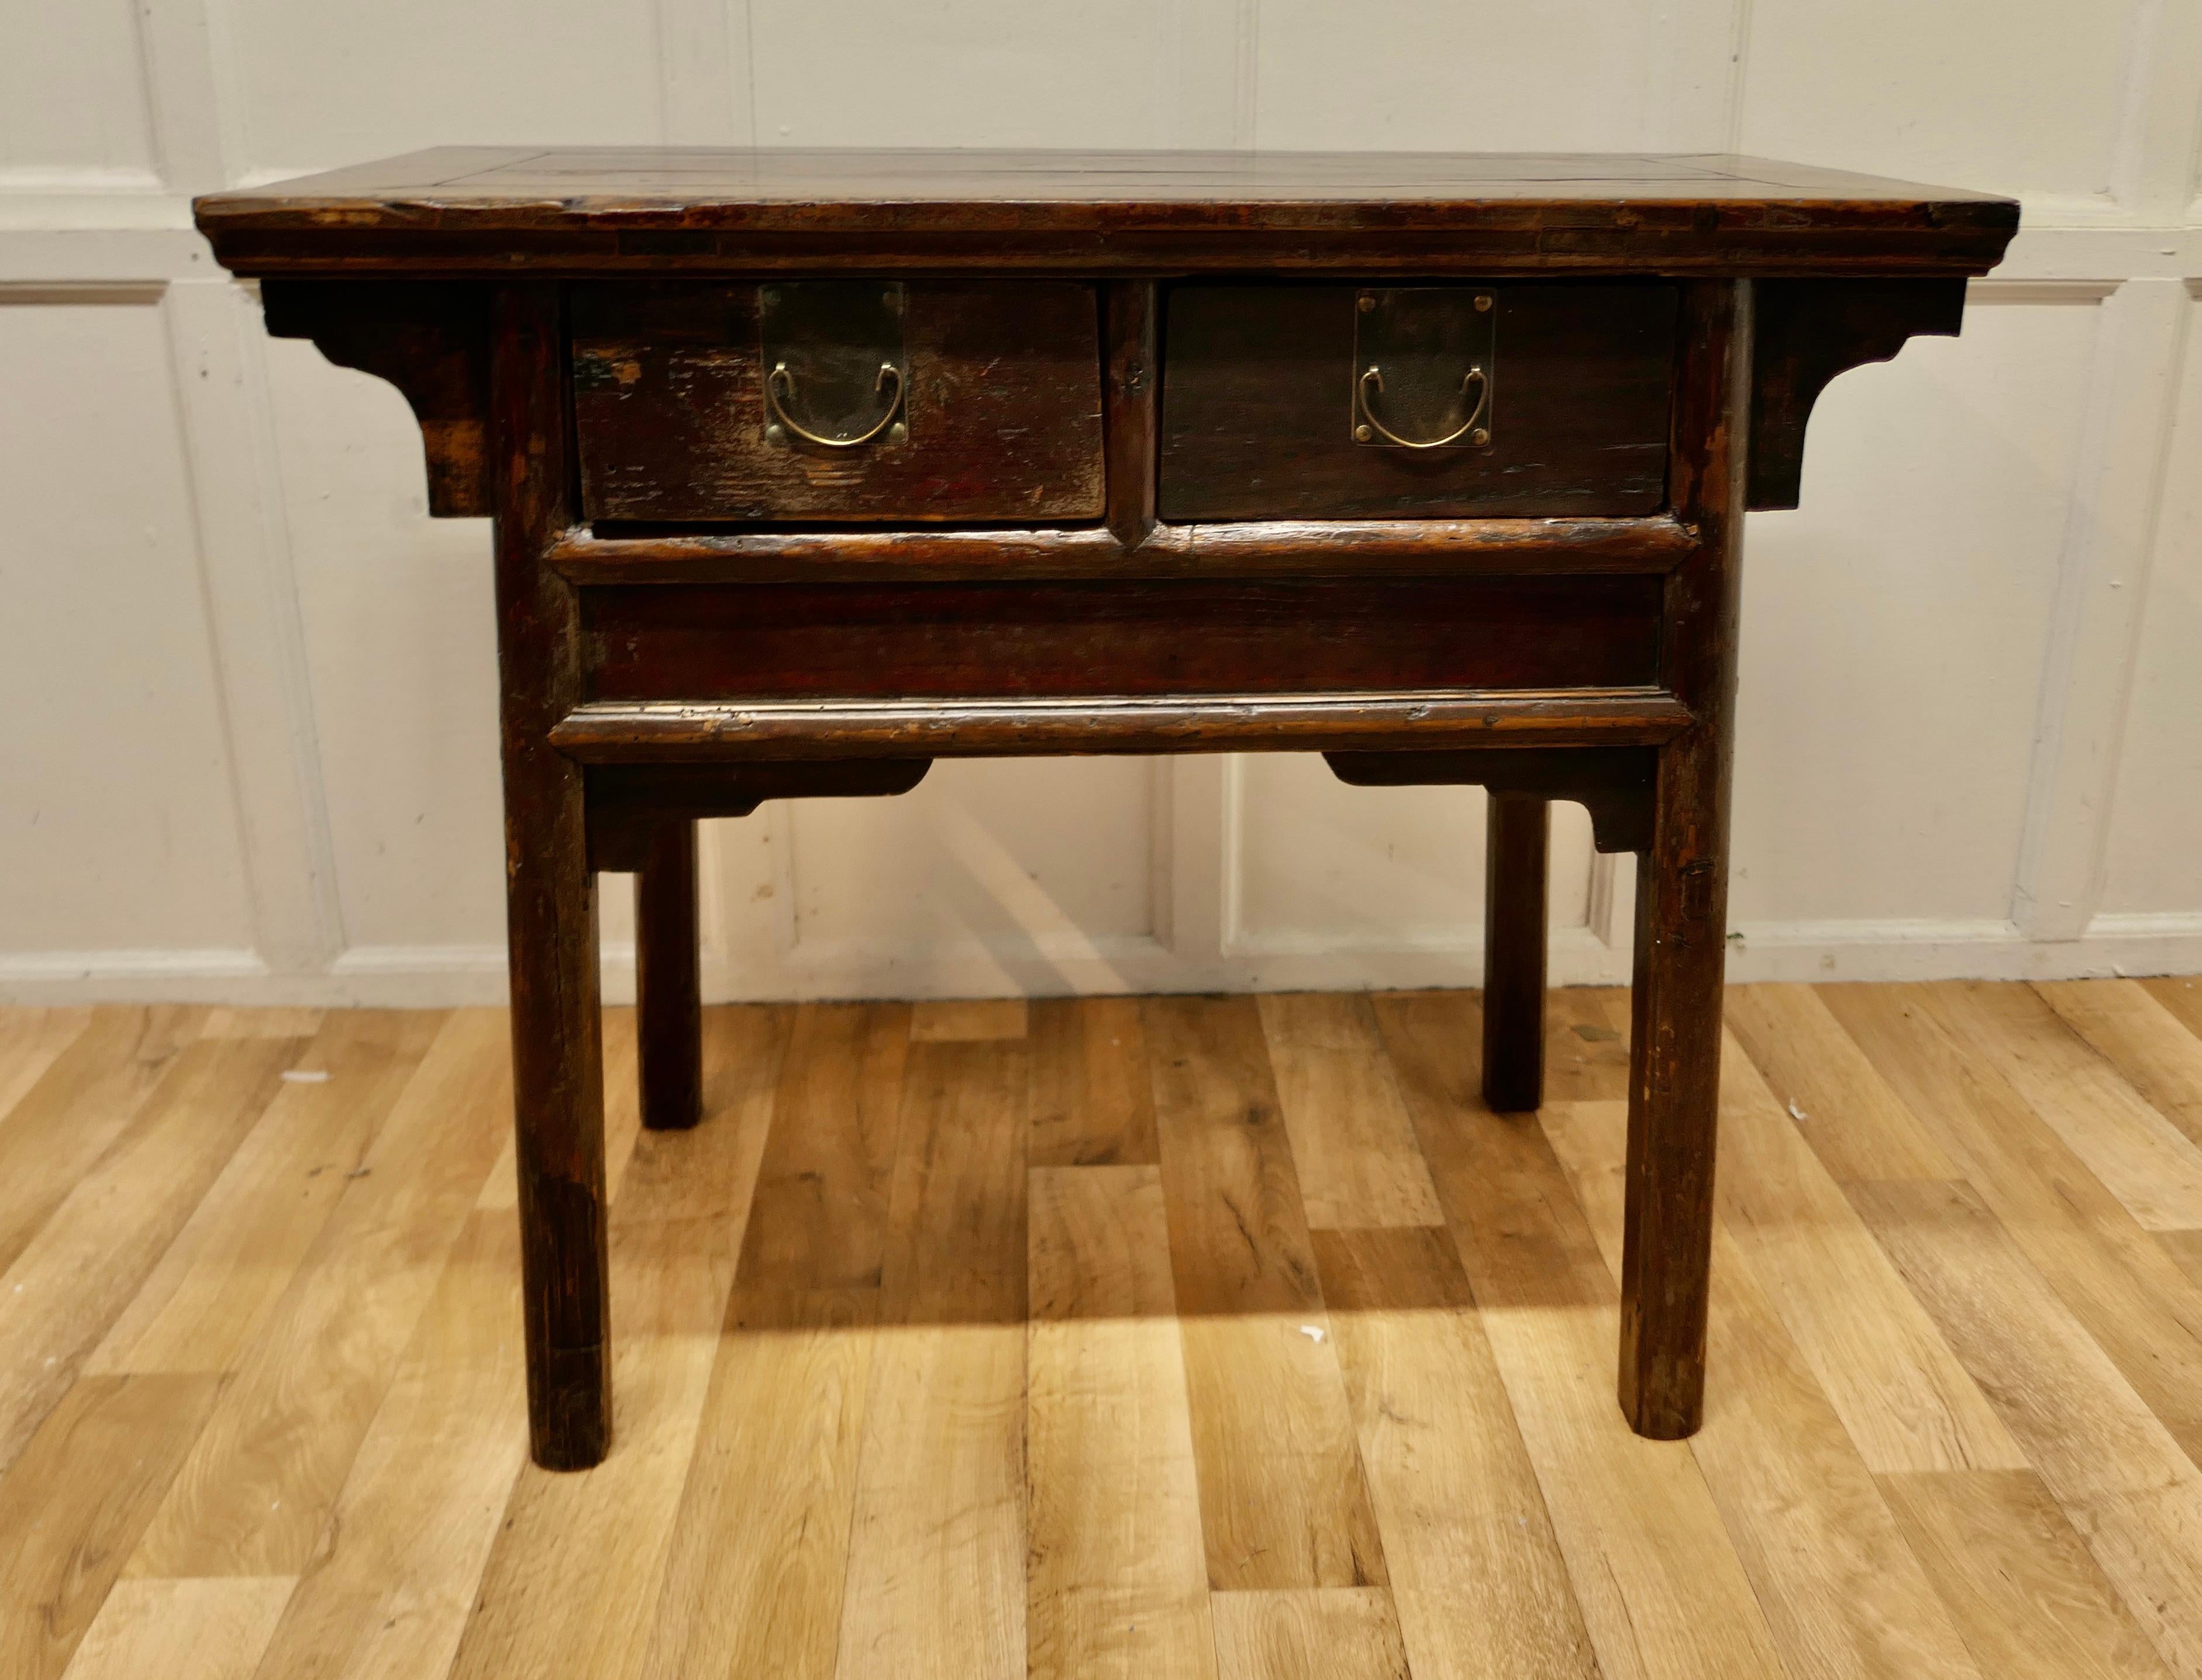 Oriental deep side table or work table 

This is a very attractive piece, the table has a broad cleated border which has superb worn patina where it has been lovingly polished for many years
The table has deep 2 drawers with an overhanging top